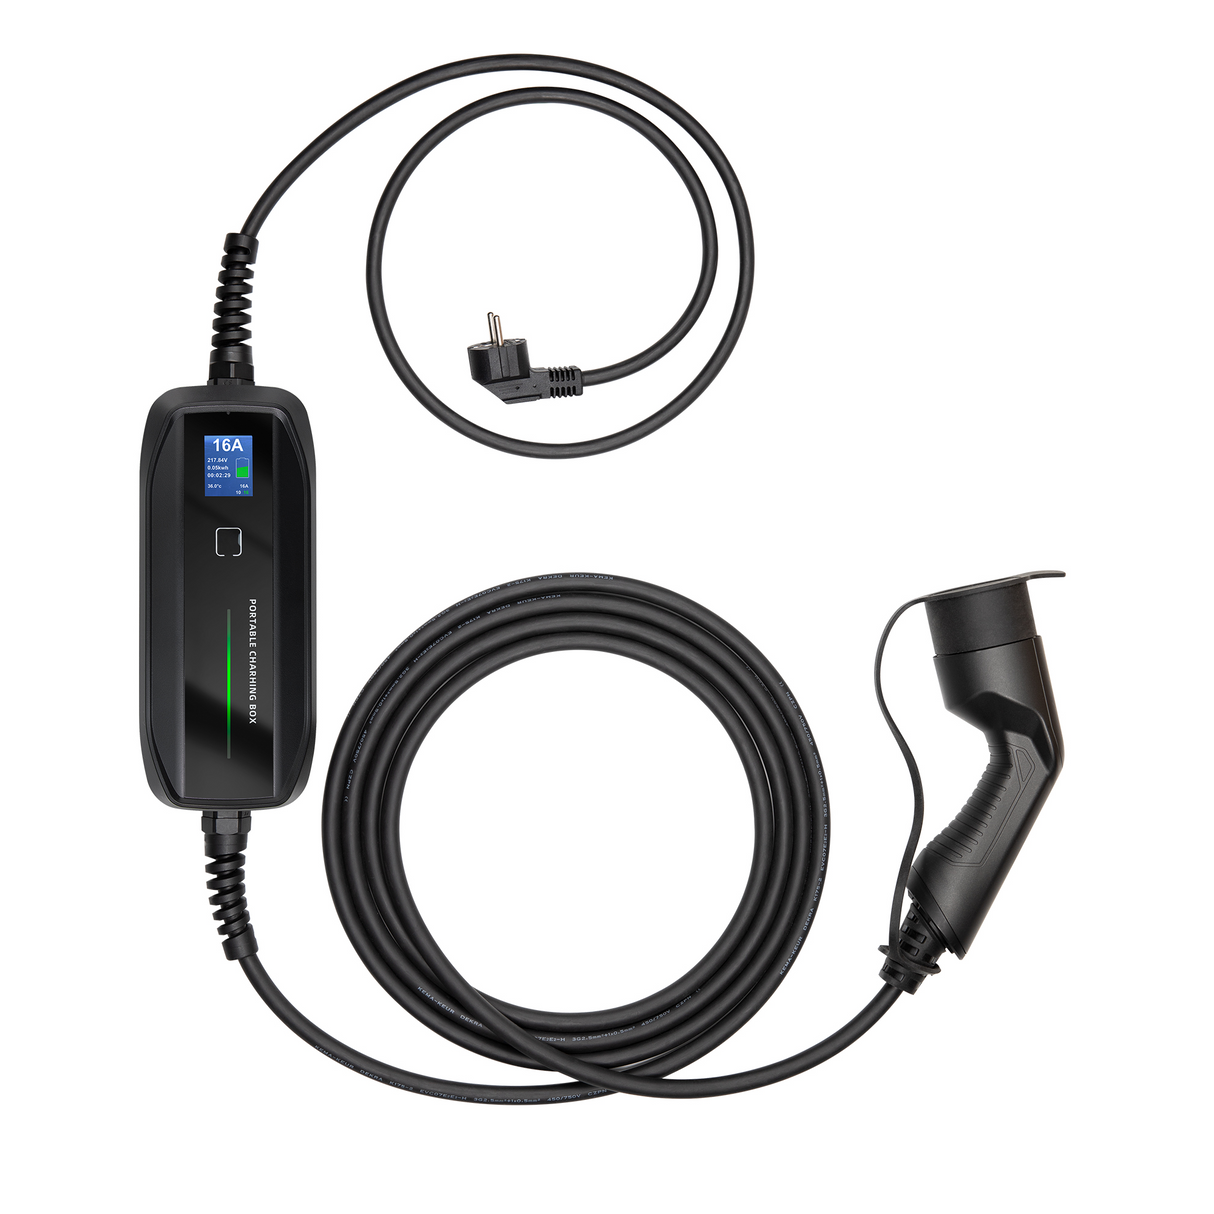 Mobile Charger Skoda Enyaq - Besen with LCD - Type 2 to Schuko